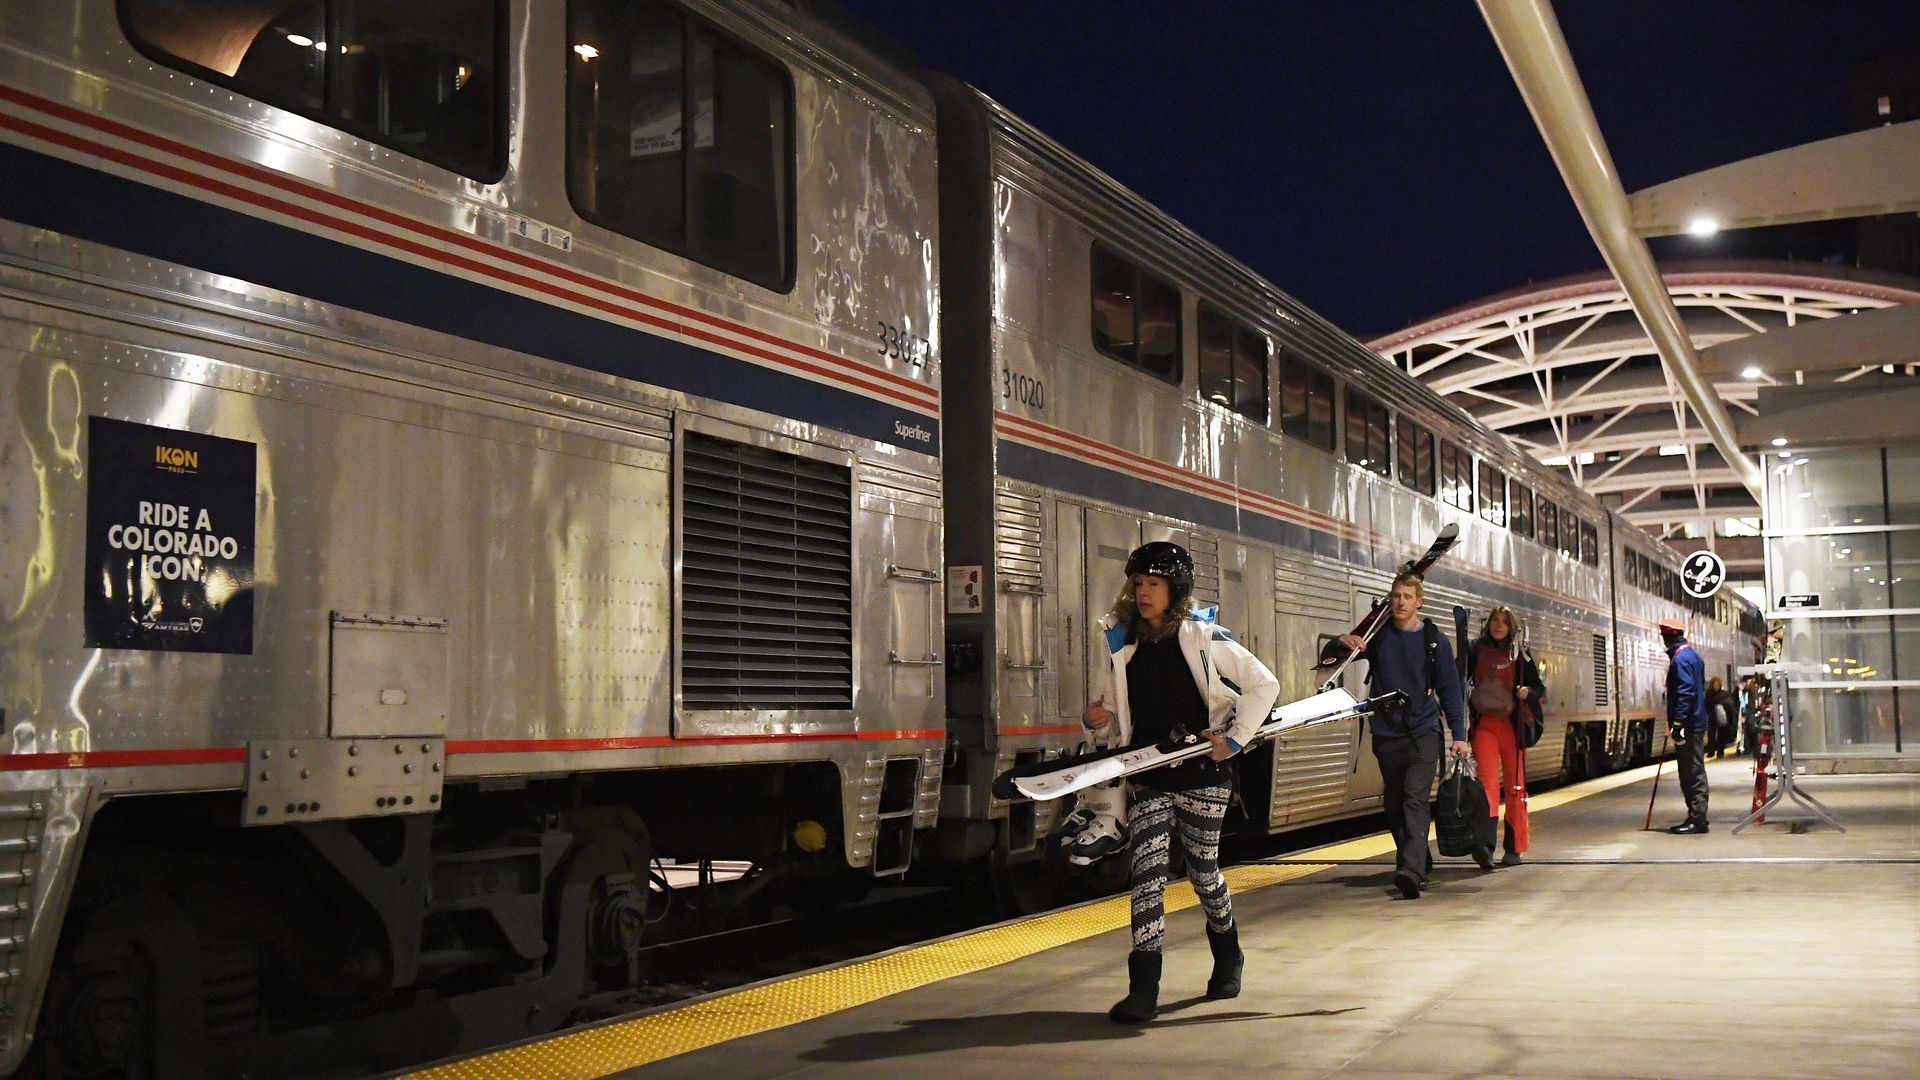 Passengers arrive at Union Station to board the Amtrak Winter Park Express ski train in 2019. Photo: Andy Cross/The Denver Post via Getty Images